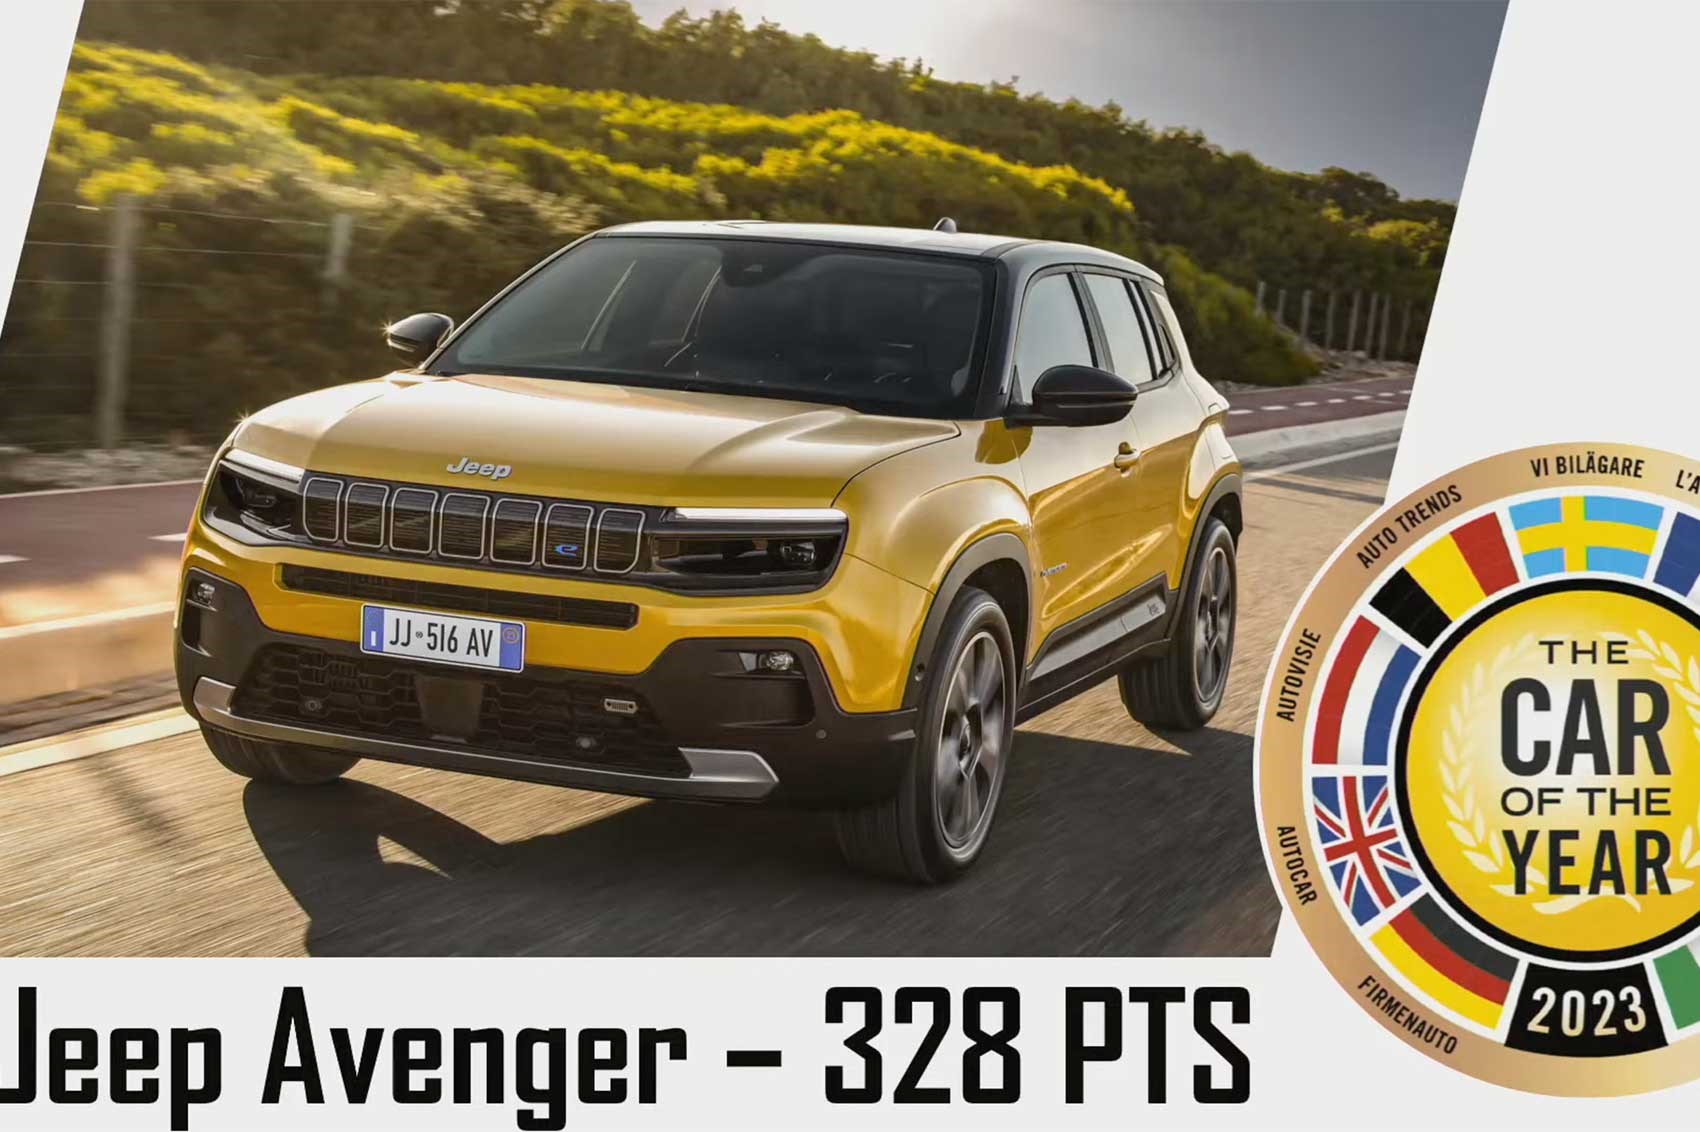 European Car of the Year 2023 won by Jeep Avenger EV